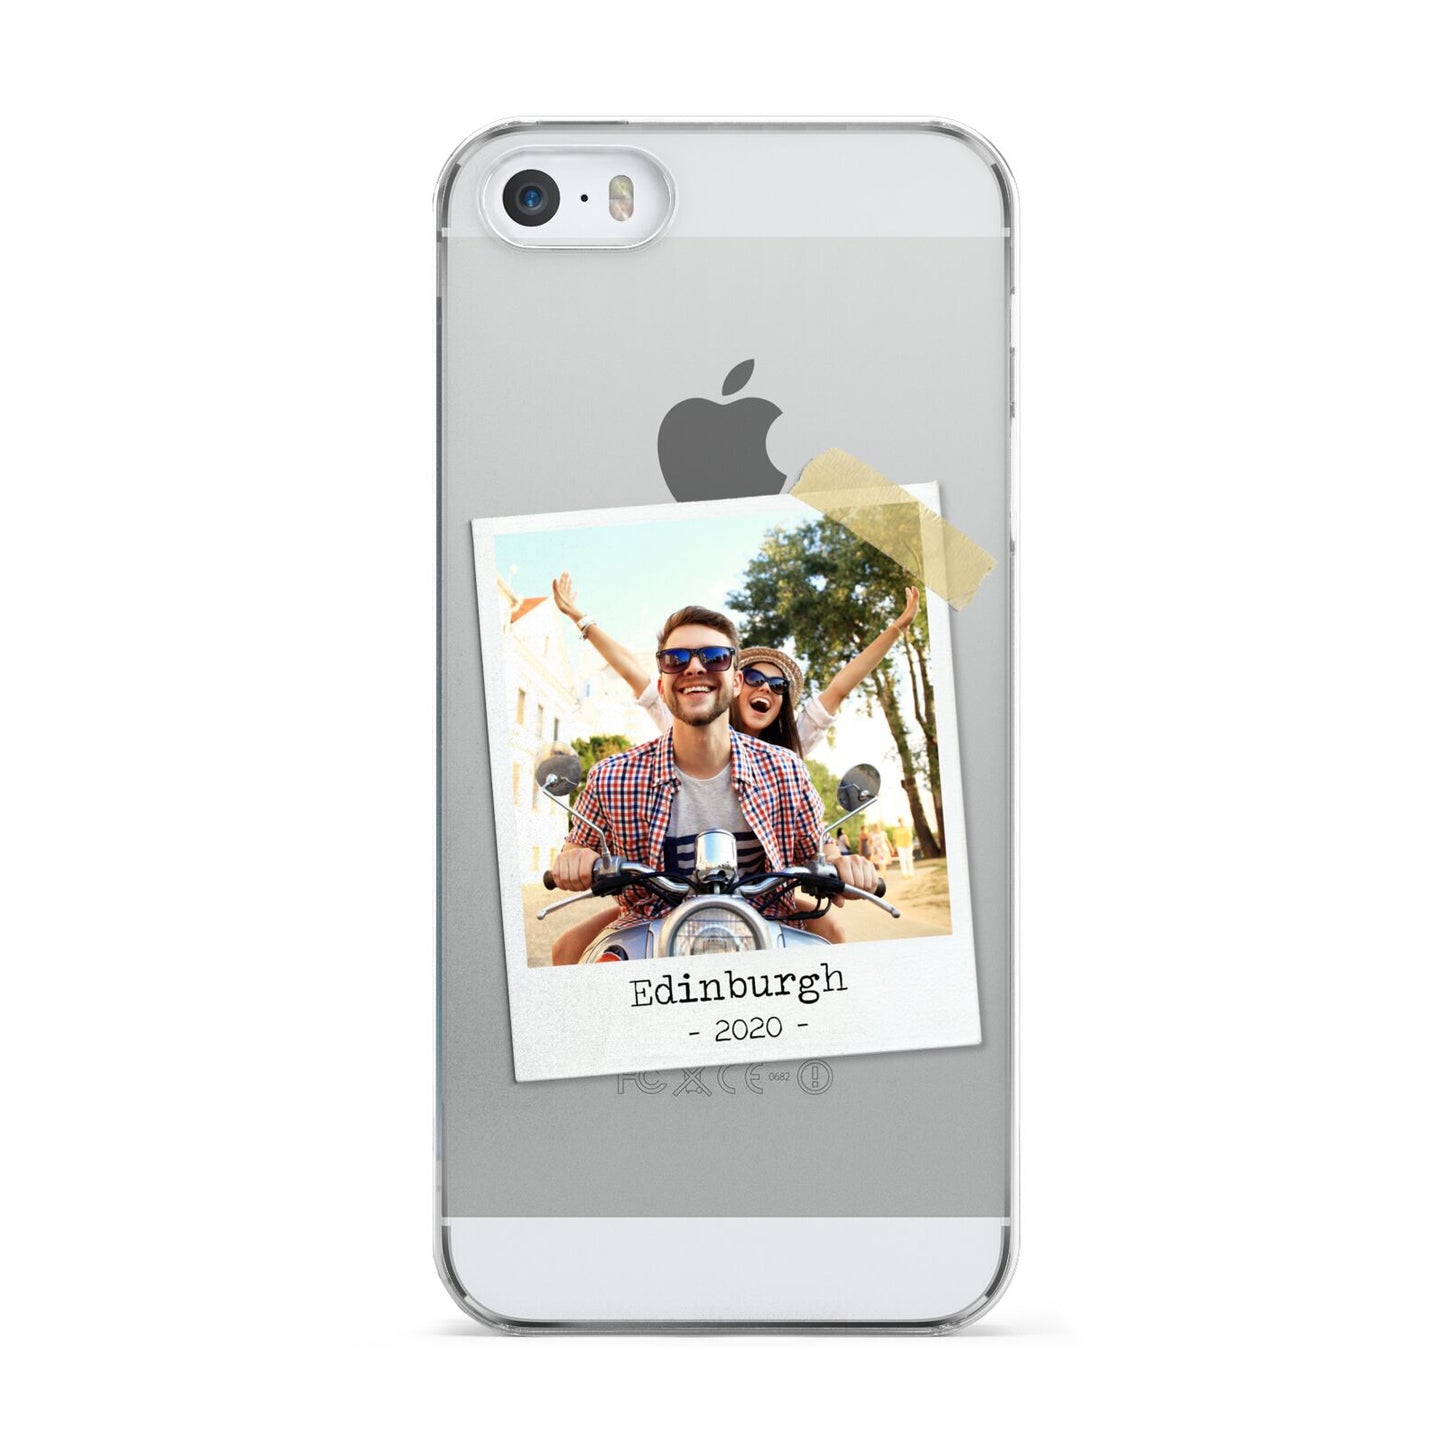 Taped Holiday Snap Photo Upload Apple iPhone 5 Case